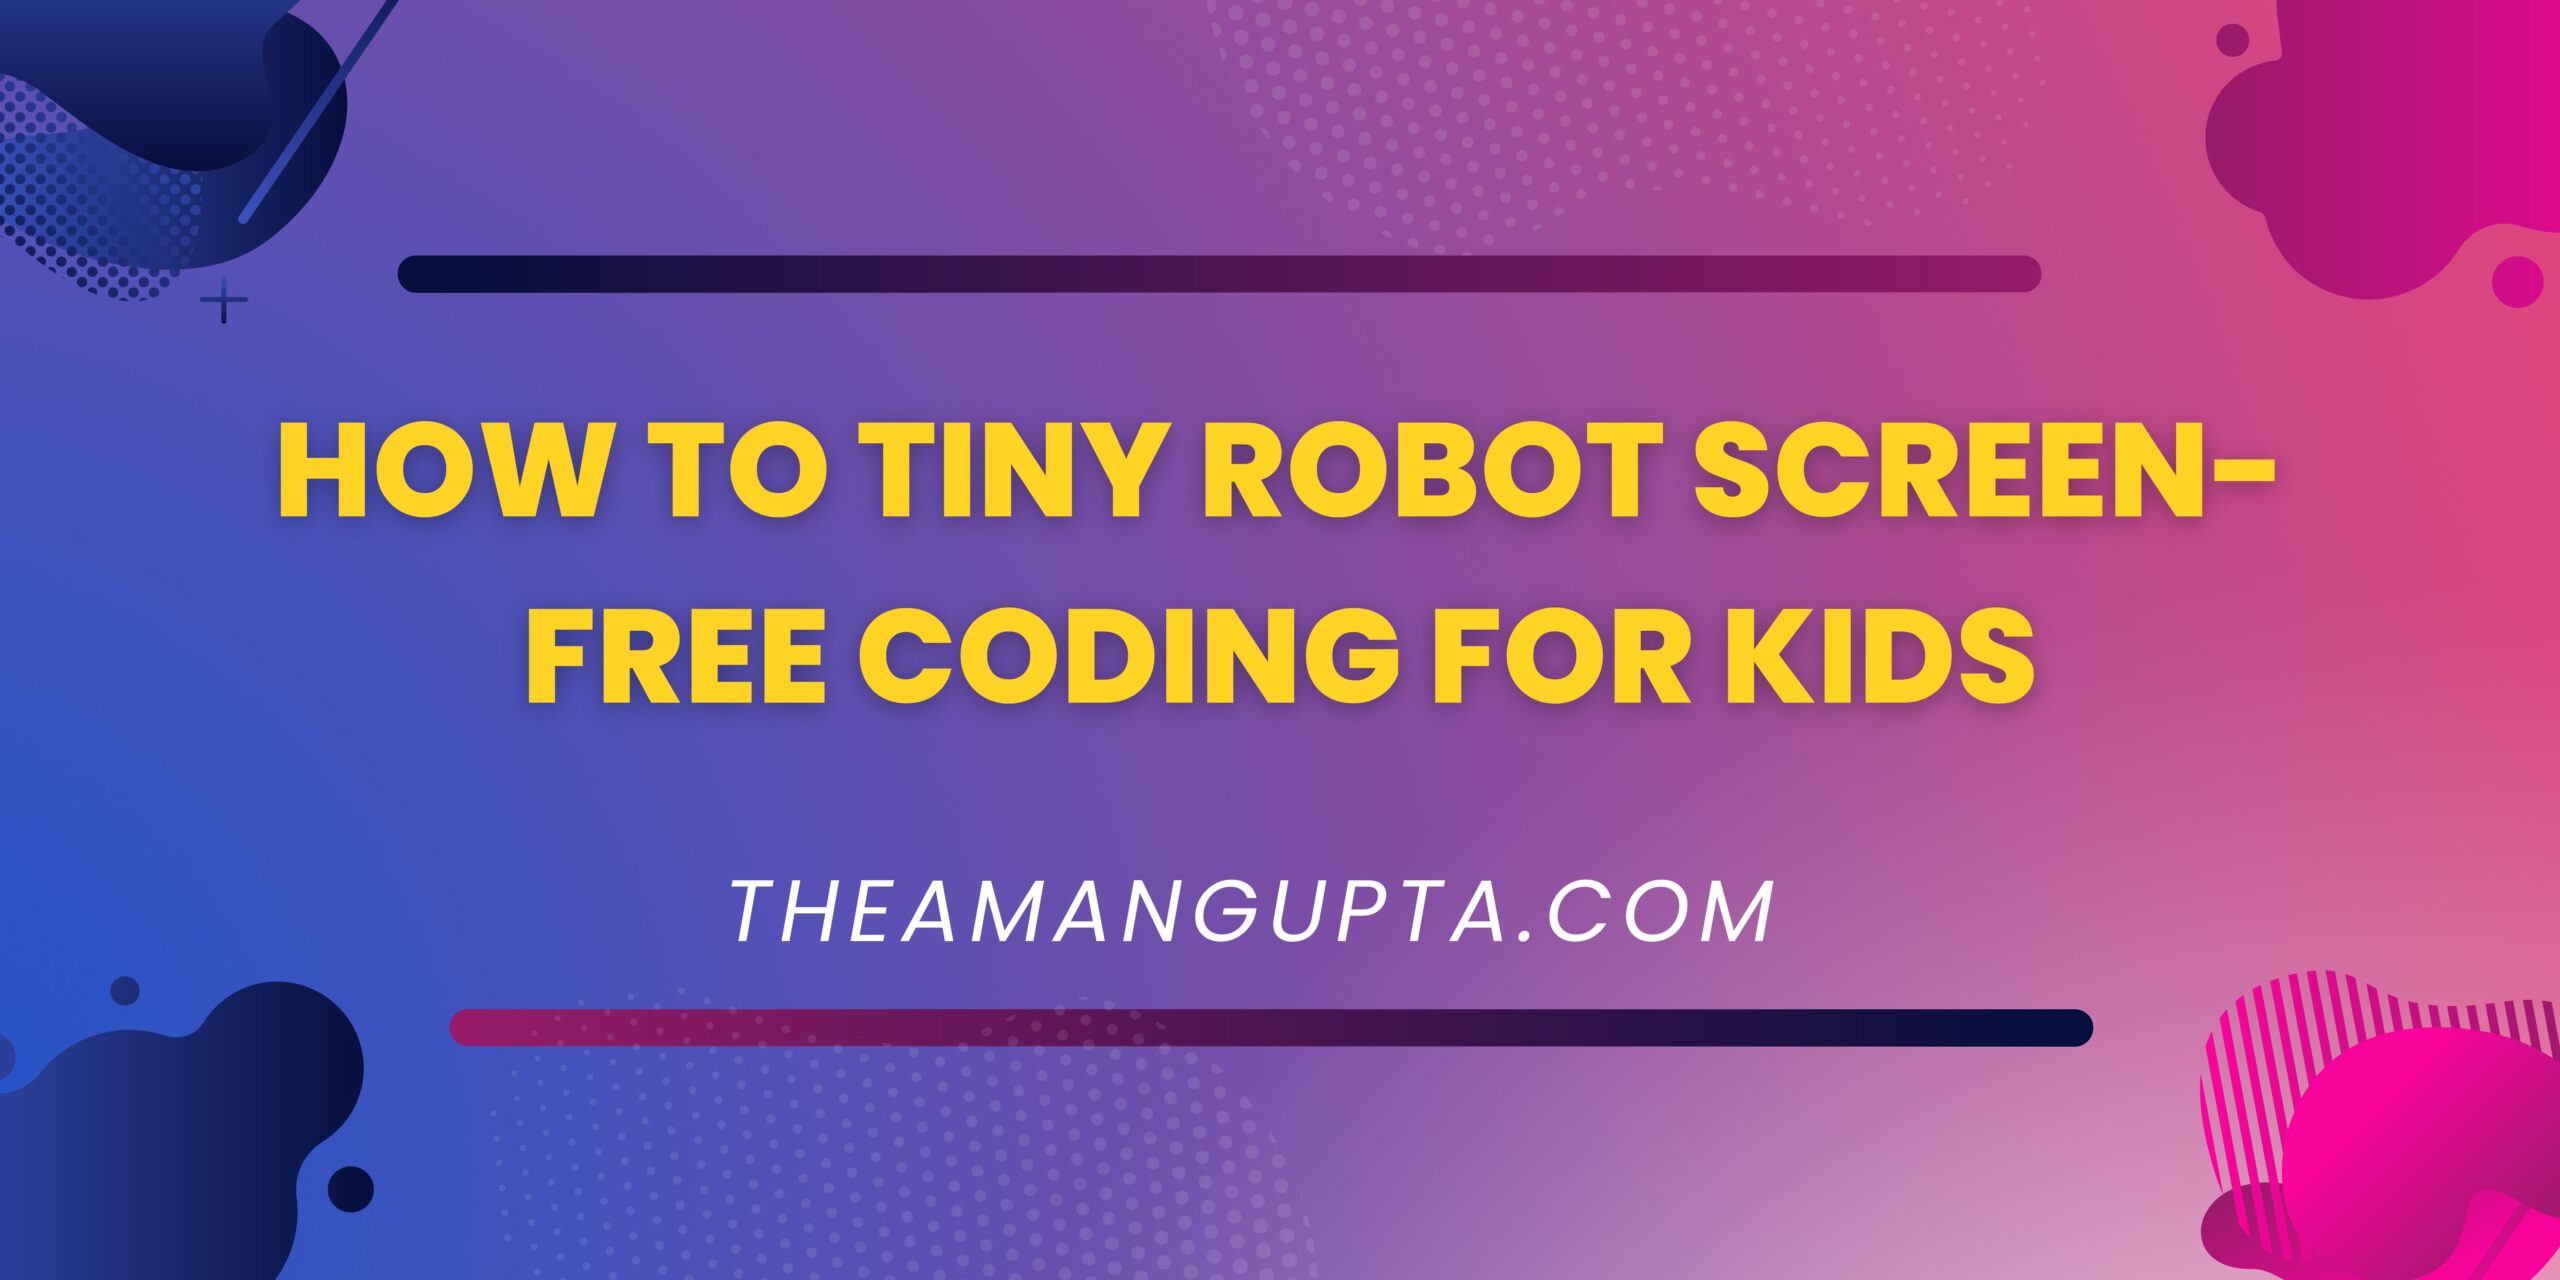 How To Tiny Robot Screen-Free Coding For Kids|How To Tiny Robot Screen-Free Coding For Kids|Theamangupta|Theamangupta